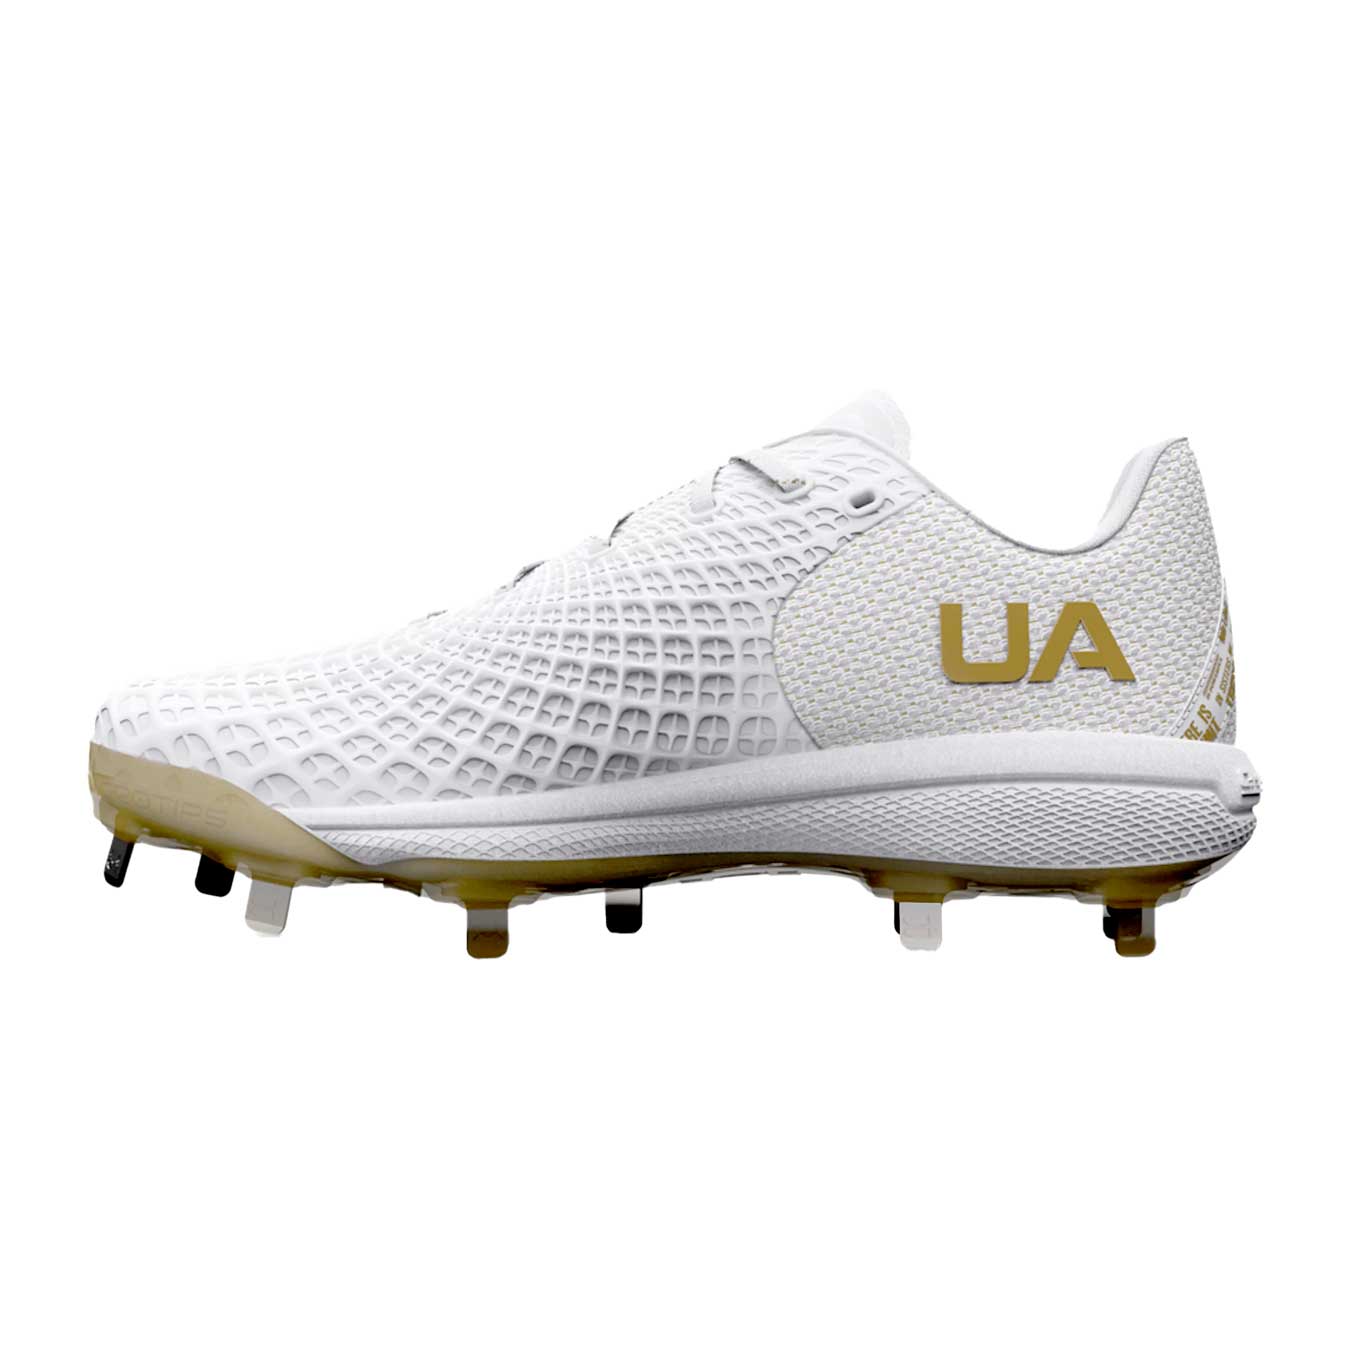 Under Armour Womens Glyde 2.0 Metal